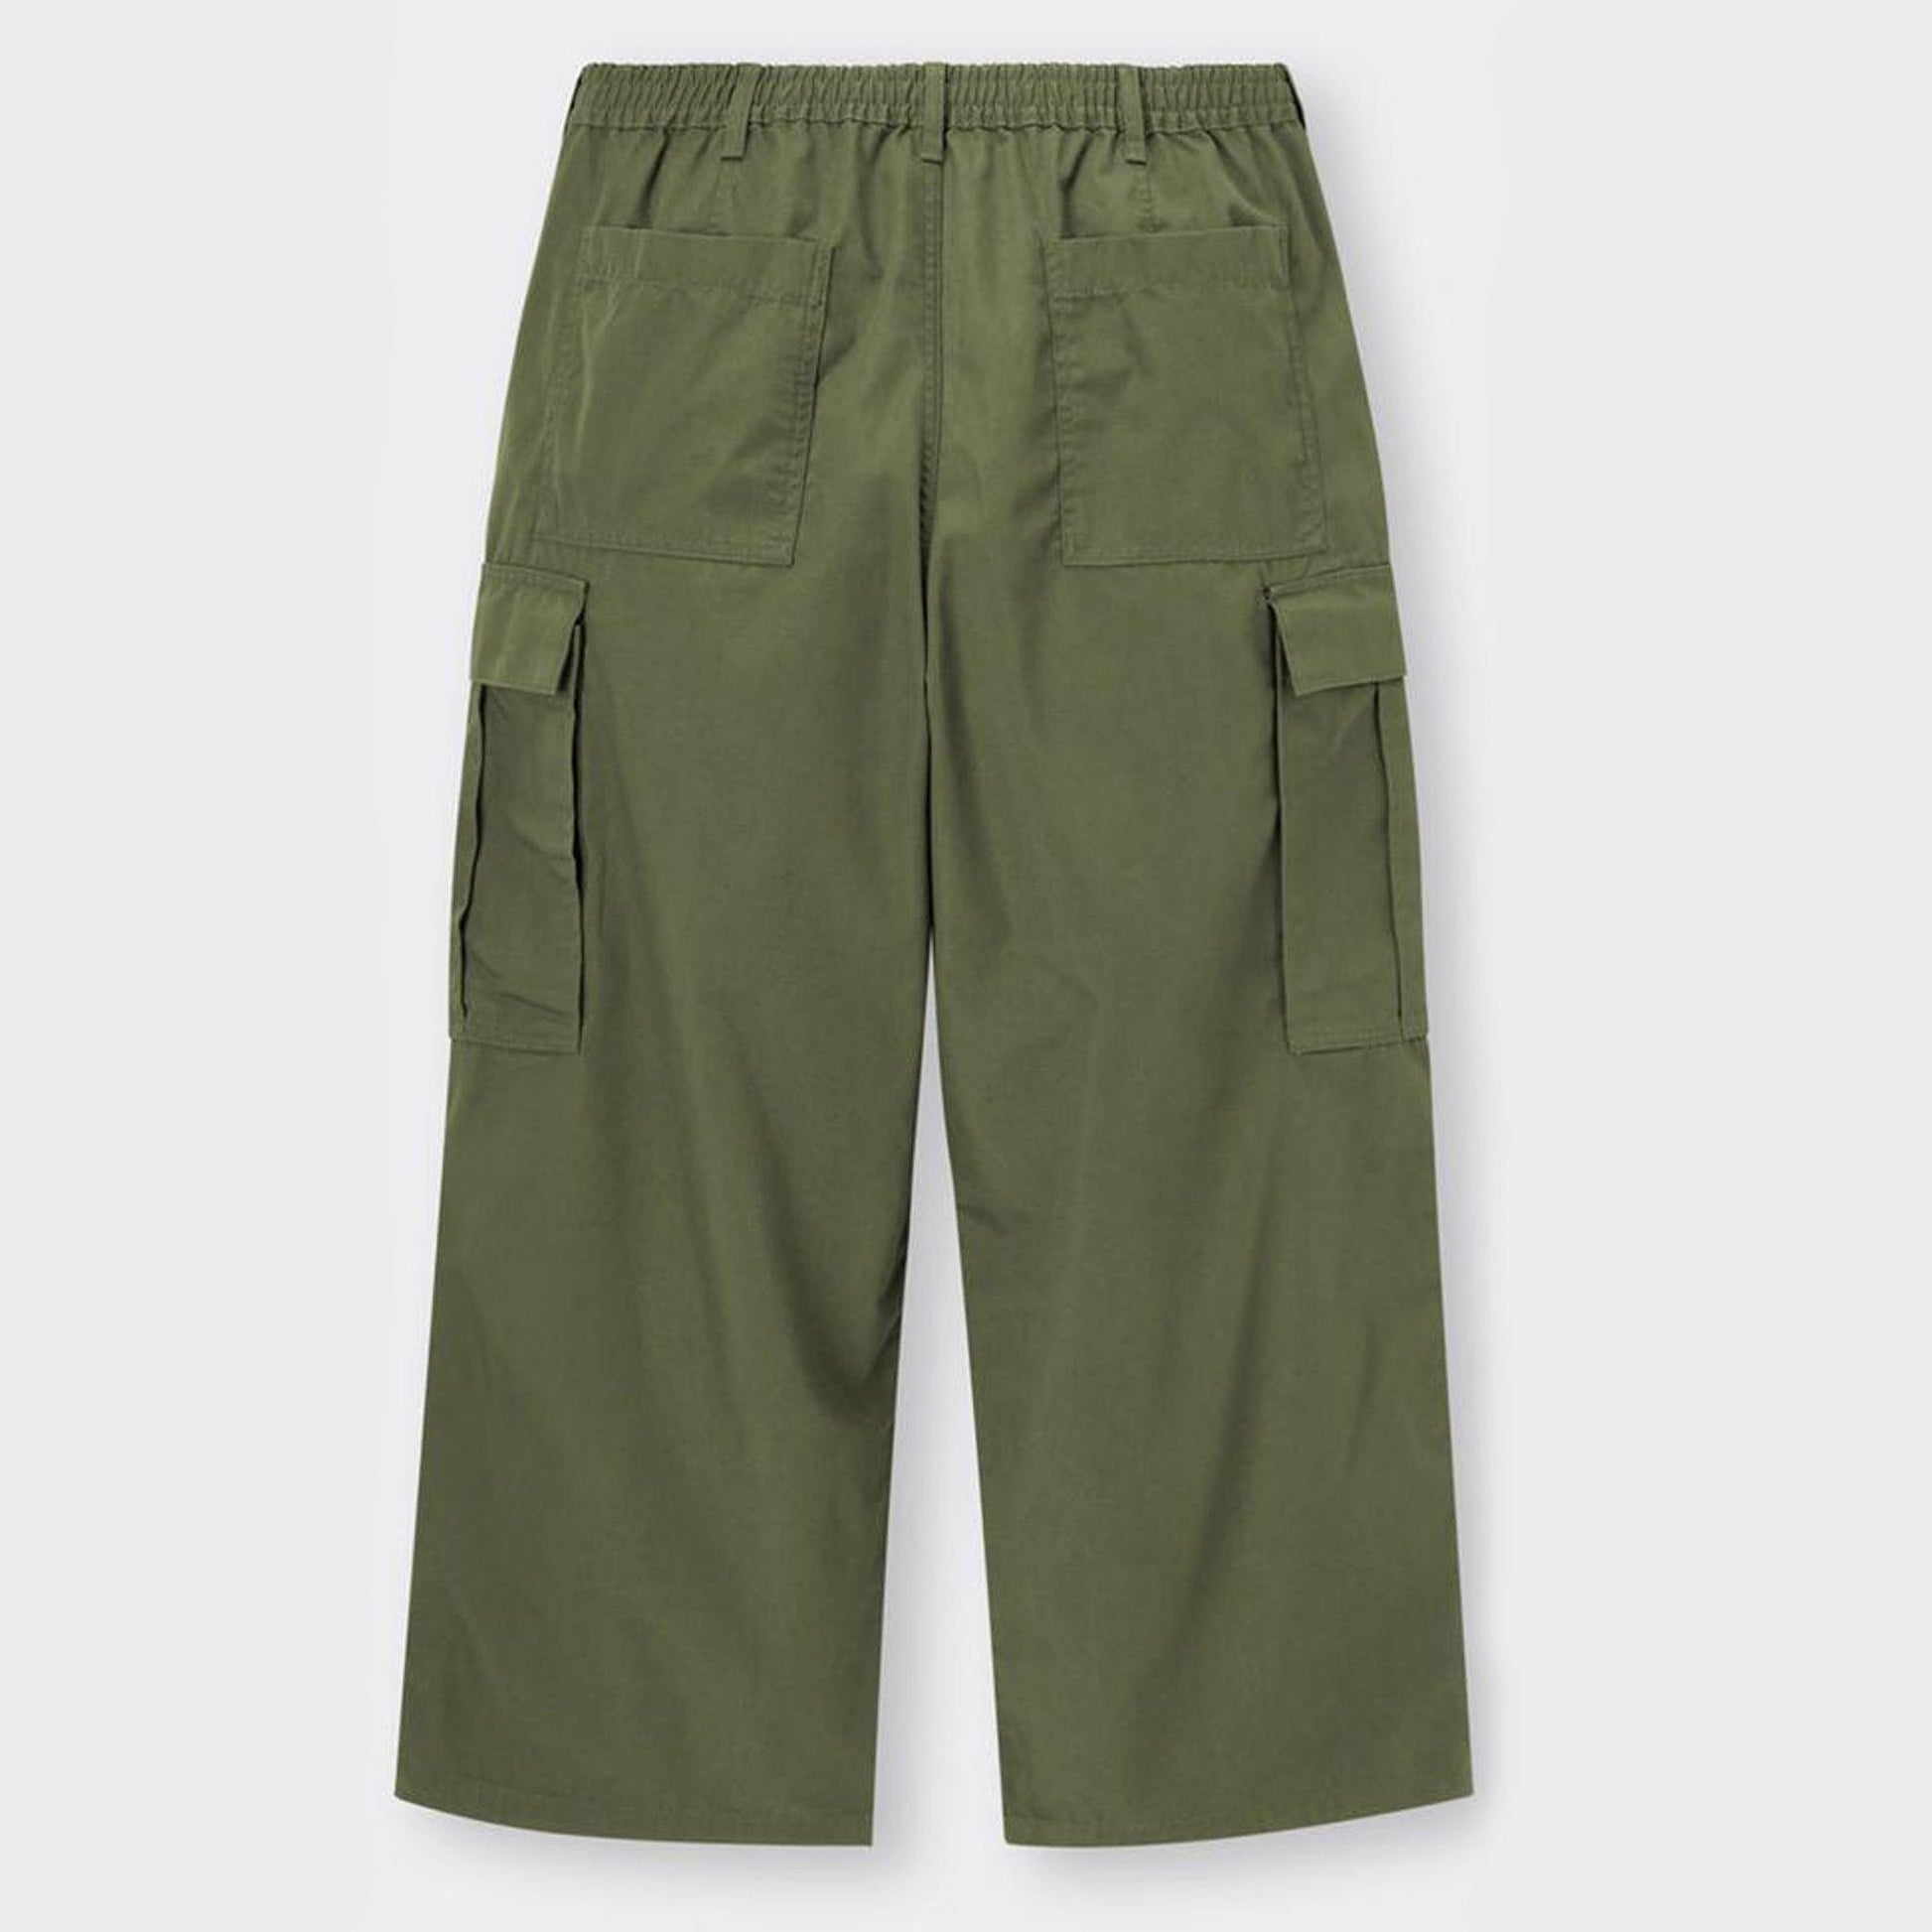 Female Olive Green Cargo Trousers (6 pockets)